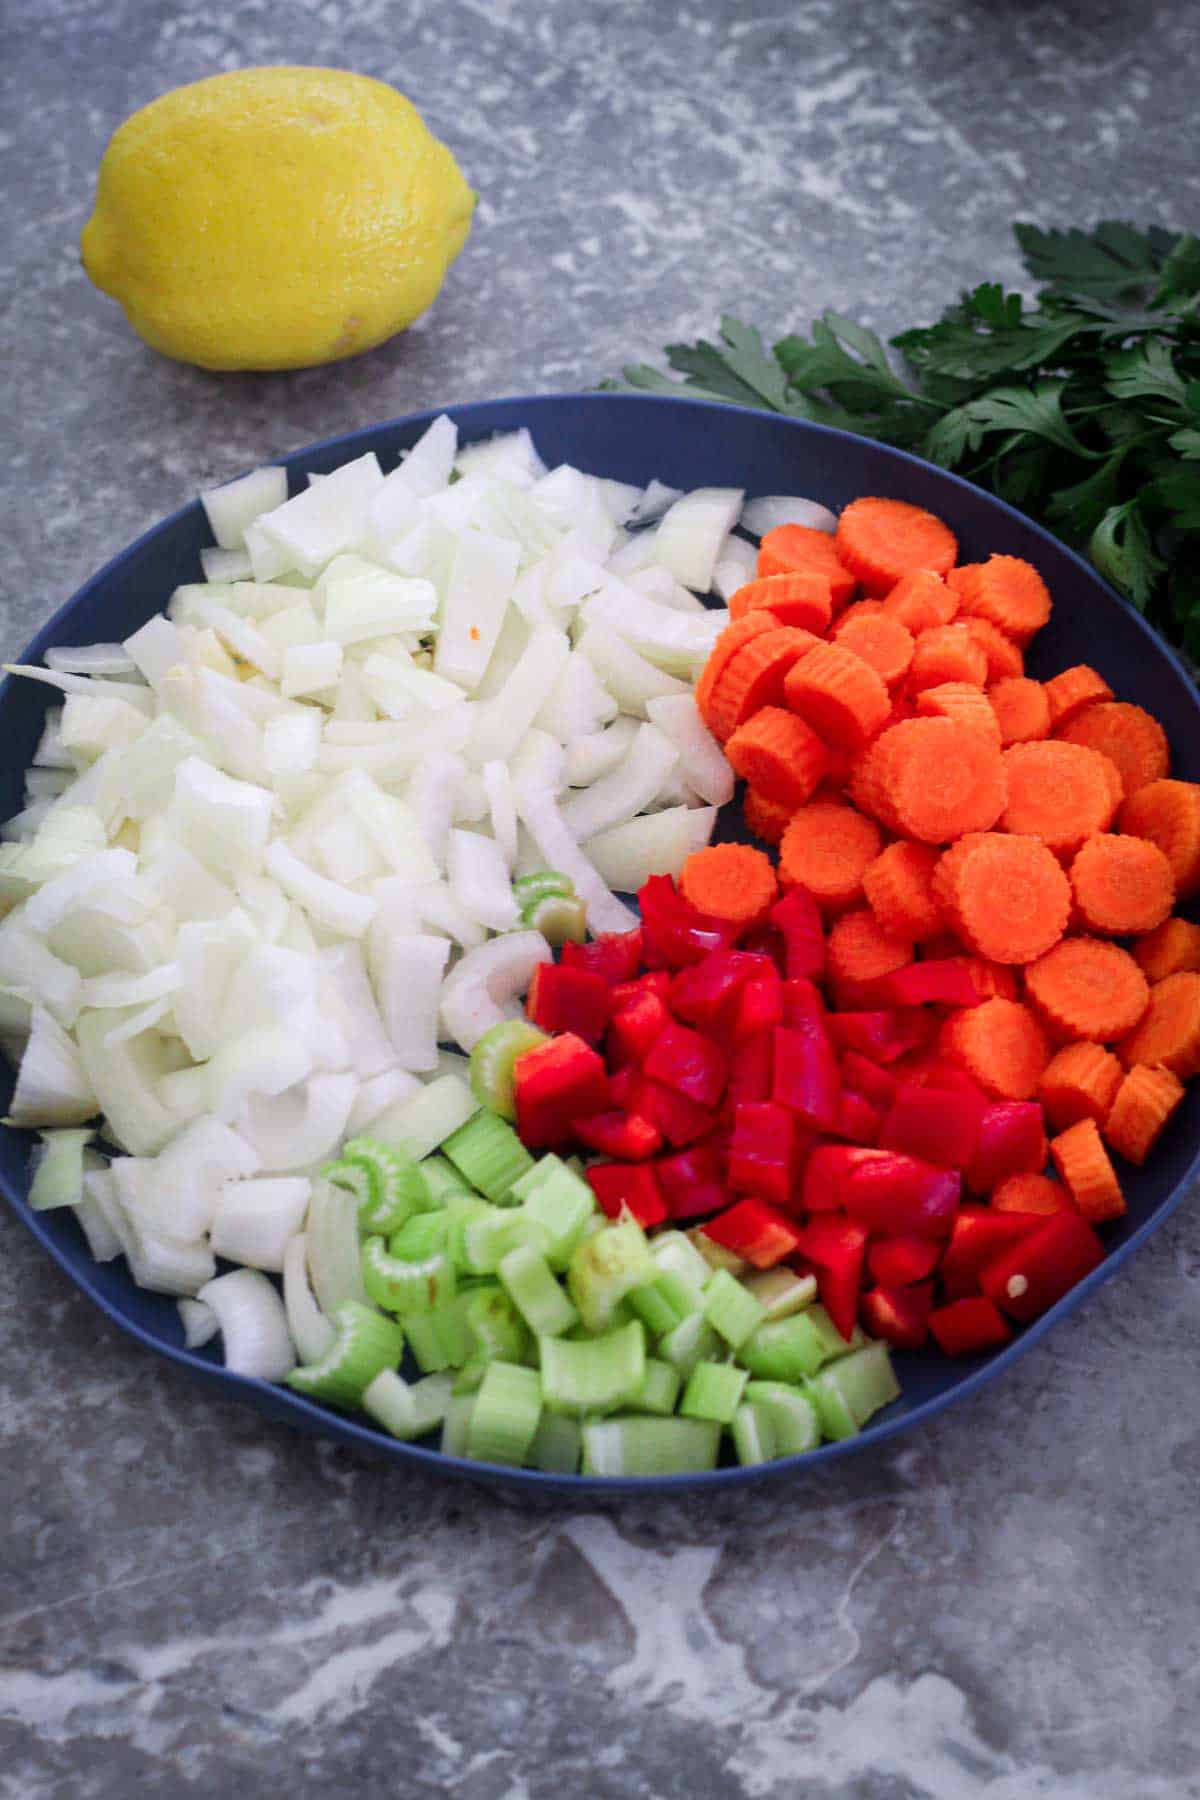 A plate with chopped onion, carrots, red bell pepper and celery. There's a lemon in the background and fresh Italian parsley.